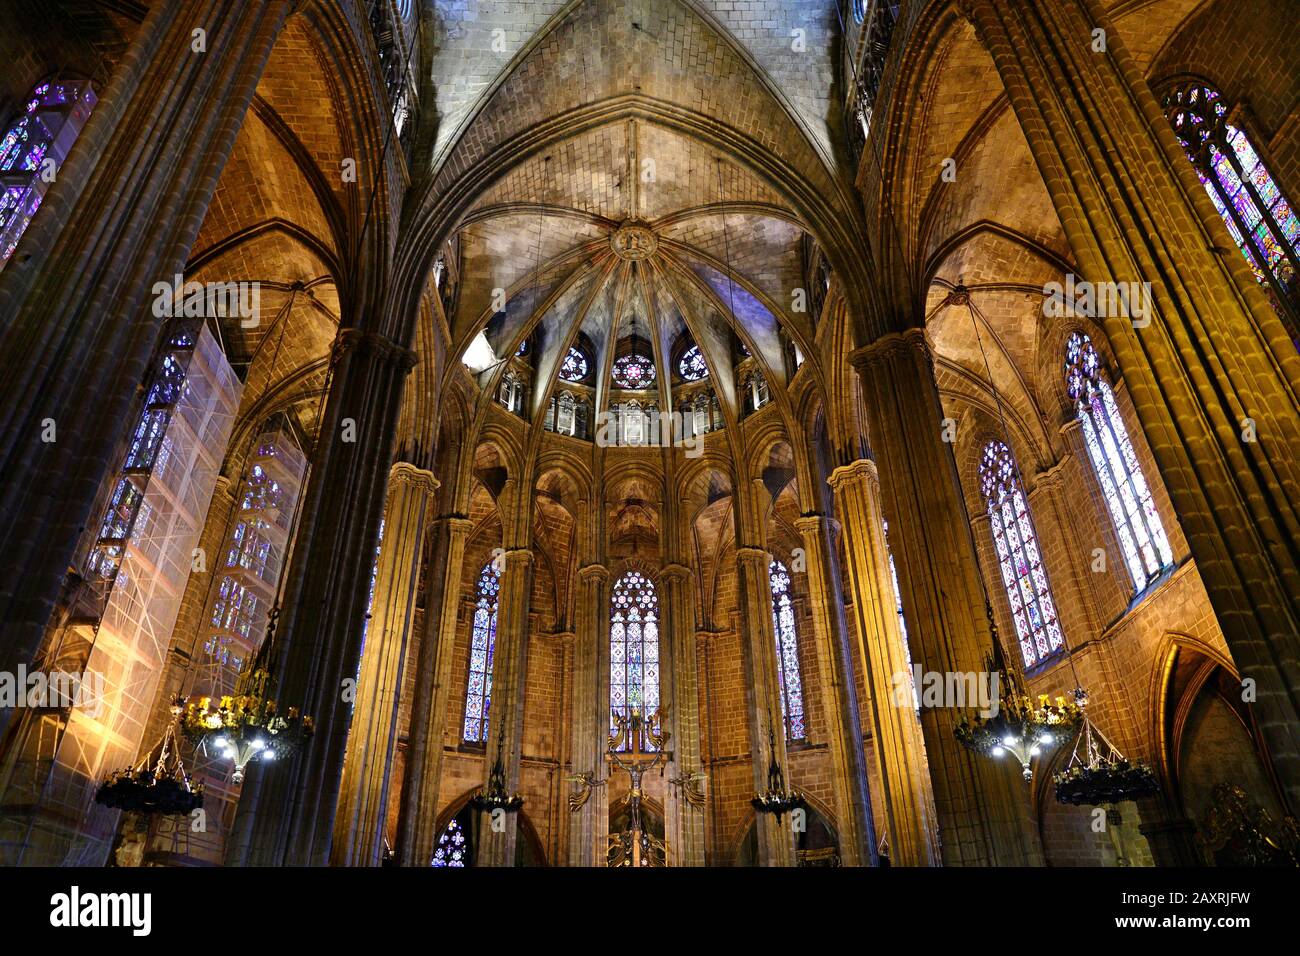 the 14th century Gothic Barcelona Cathedral (Catedral de Barcelona) where 13 geese are famously kept Stock Photo